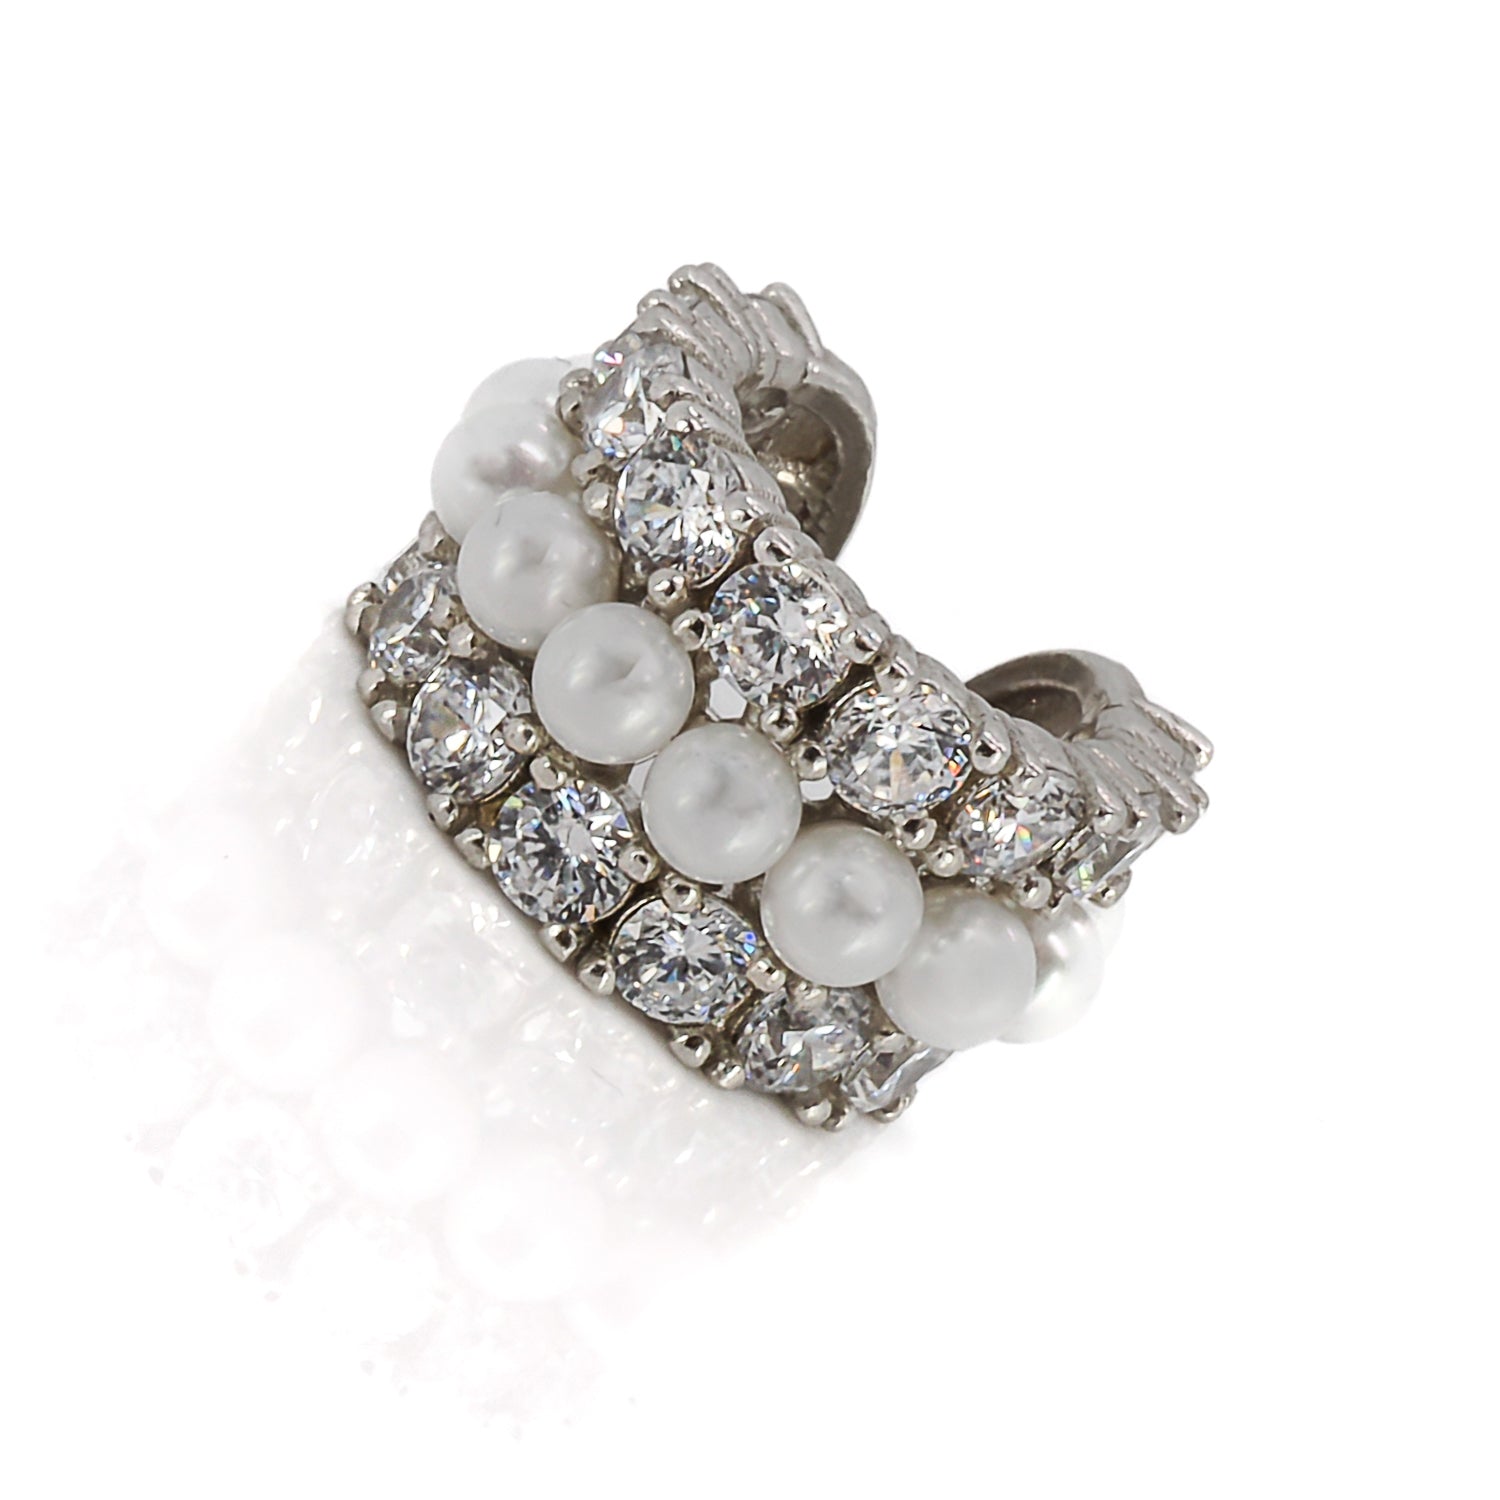 Elegance Meets Versatility - Diamond &amp; Pearl Silver Cuff Earring Handcrafted in the USA.